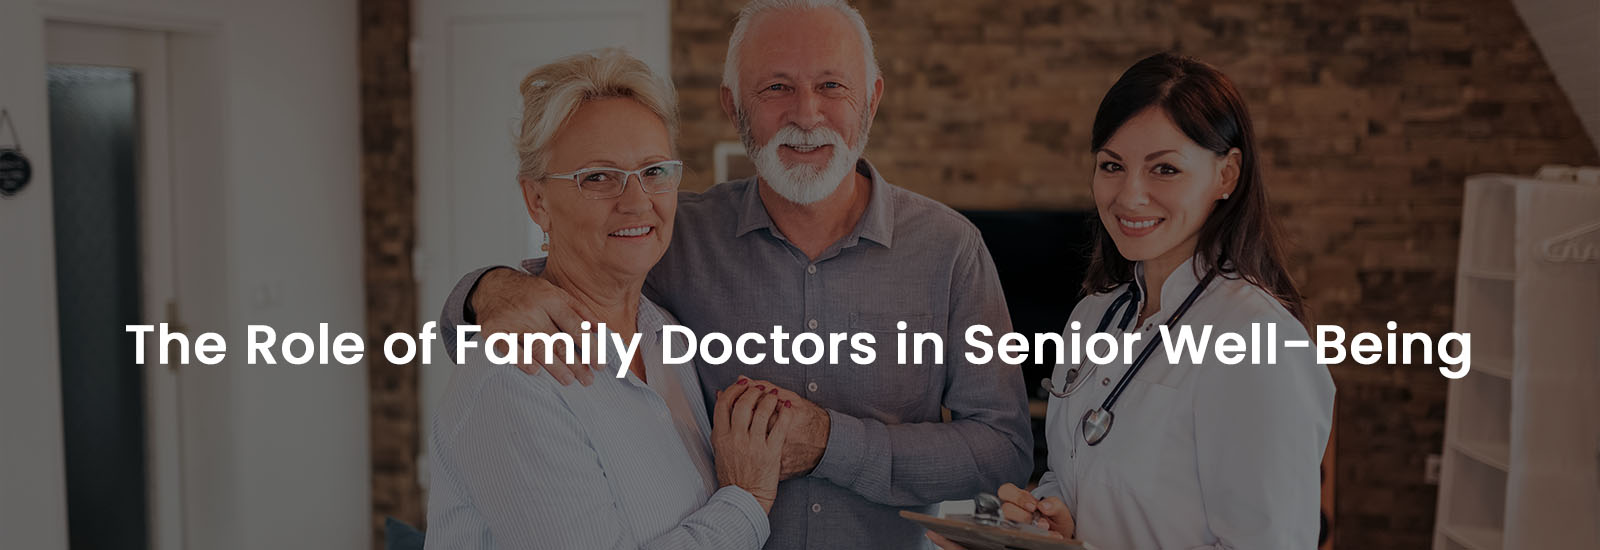 The Role of Family Doctors in Seniors Well-Being | Banner Image